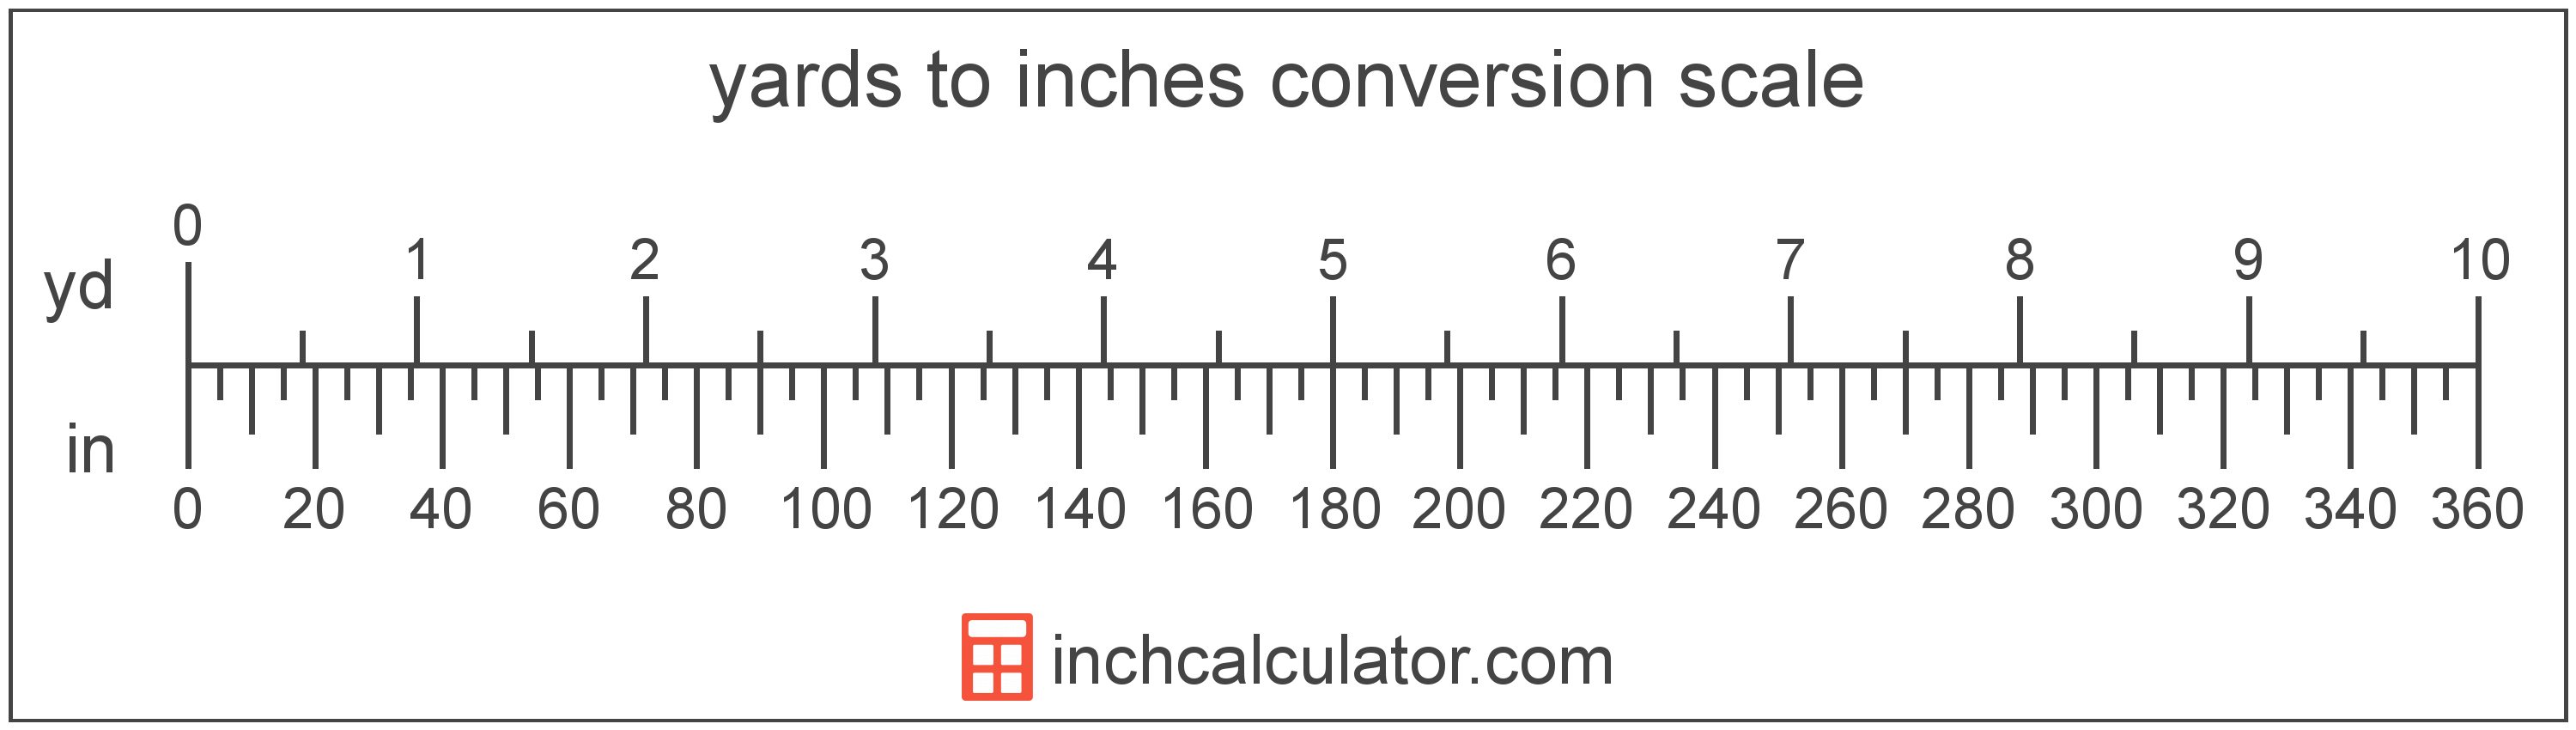 conversion scale showing yards and equivalent inches length values